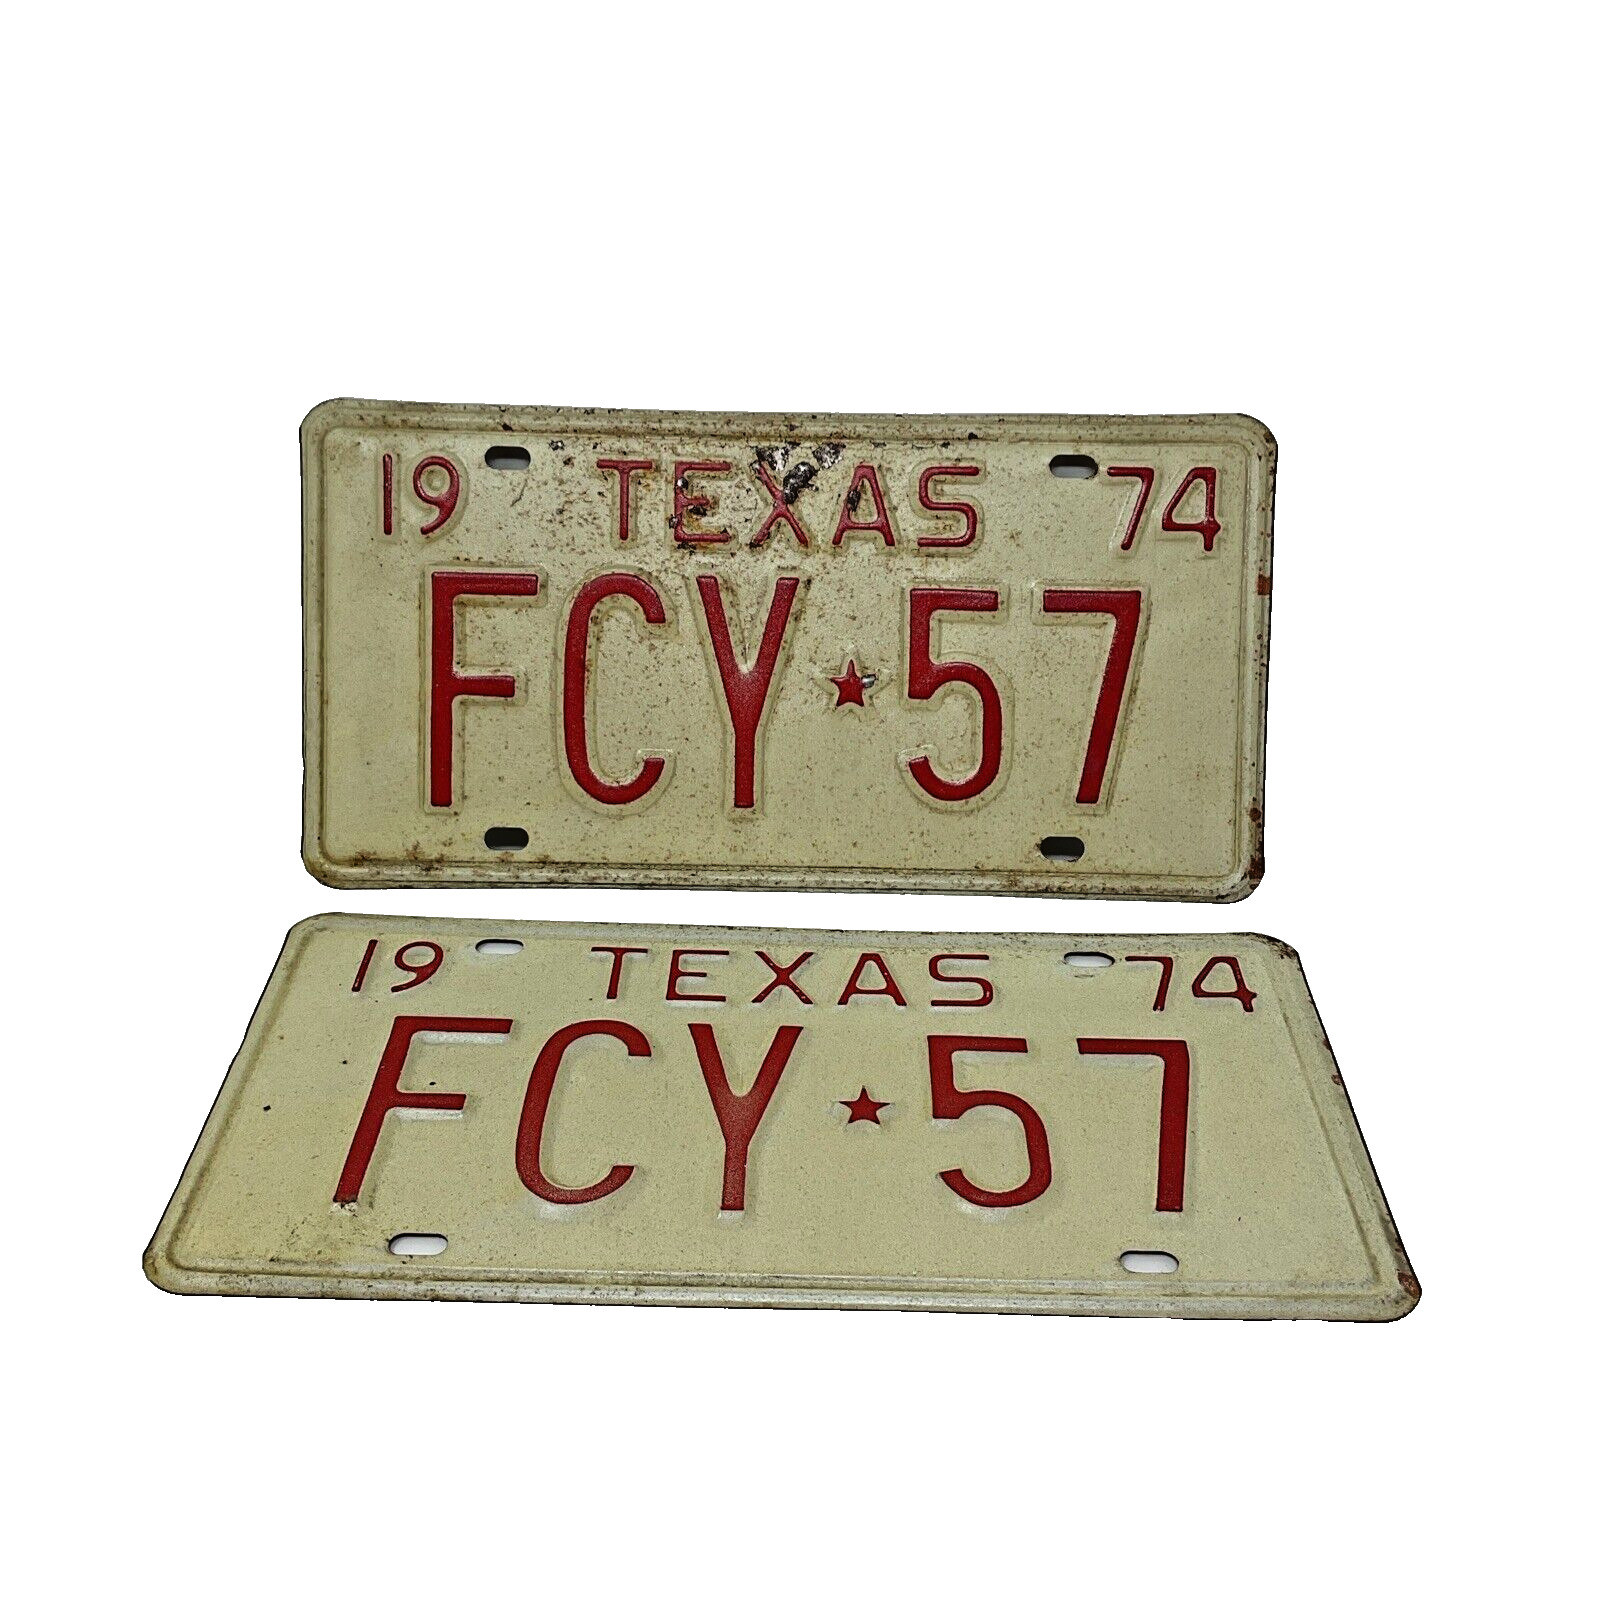 Vintage 1974 Texas License Plates Pair FCY 57 Red On White Vintage